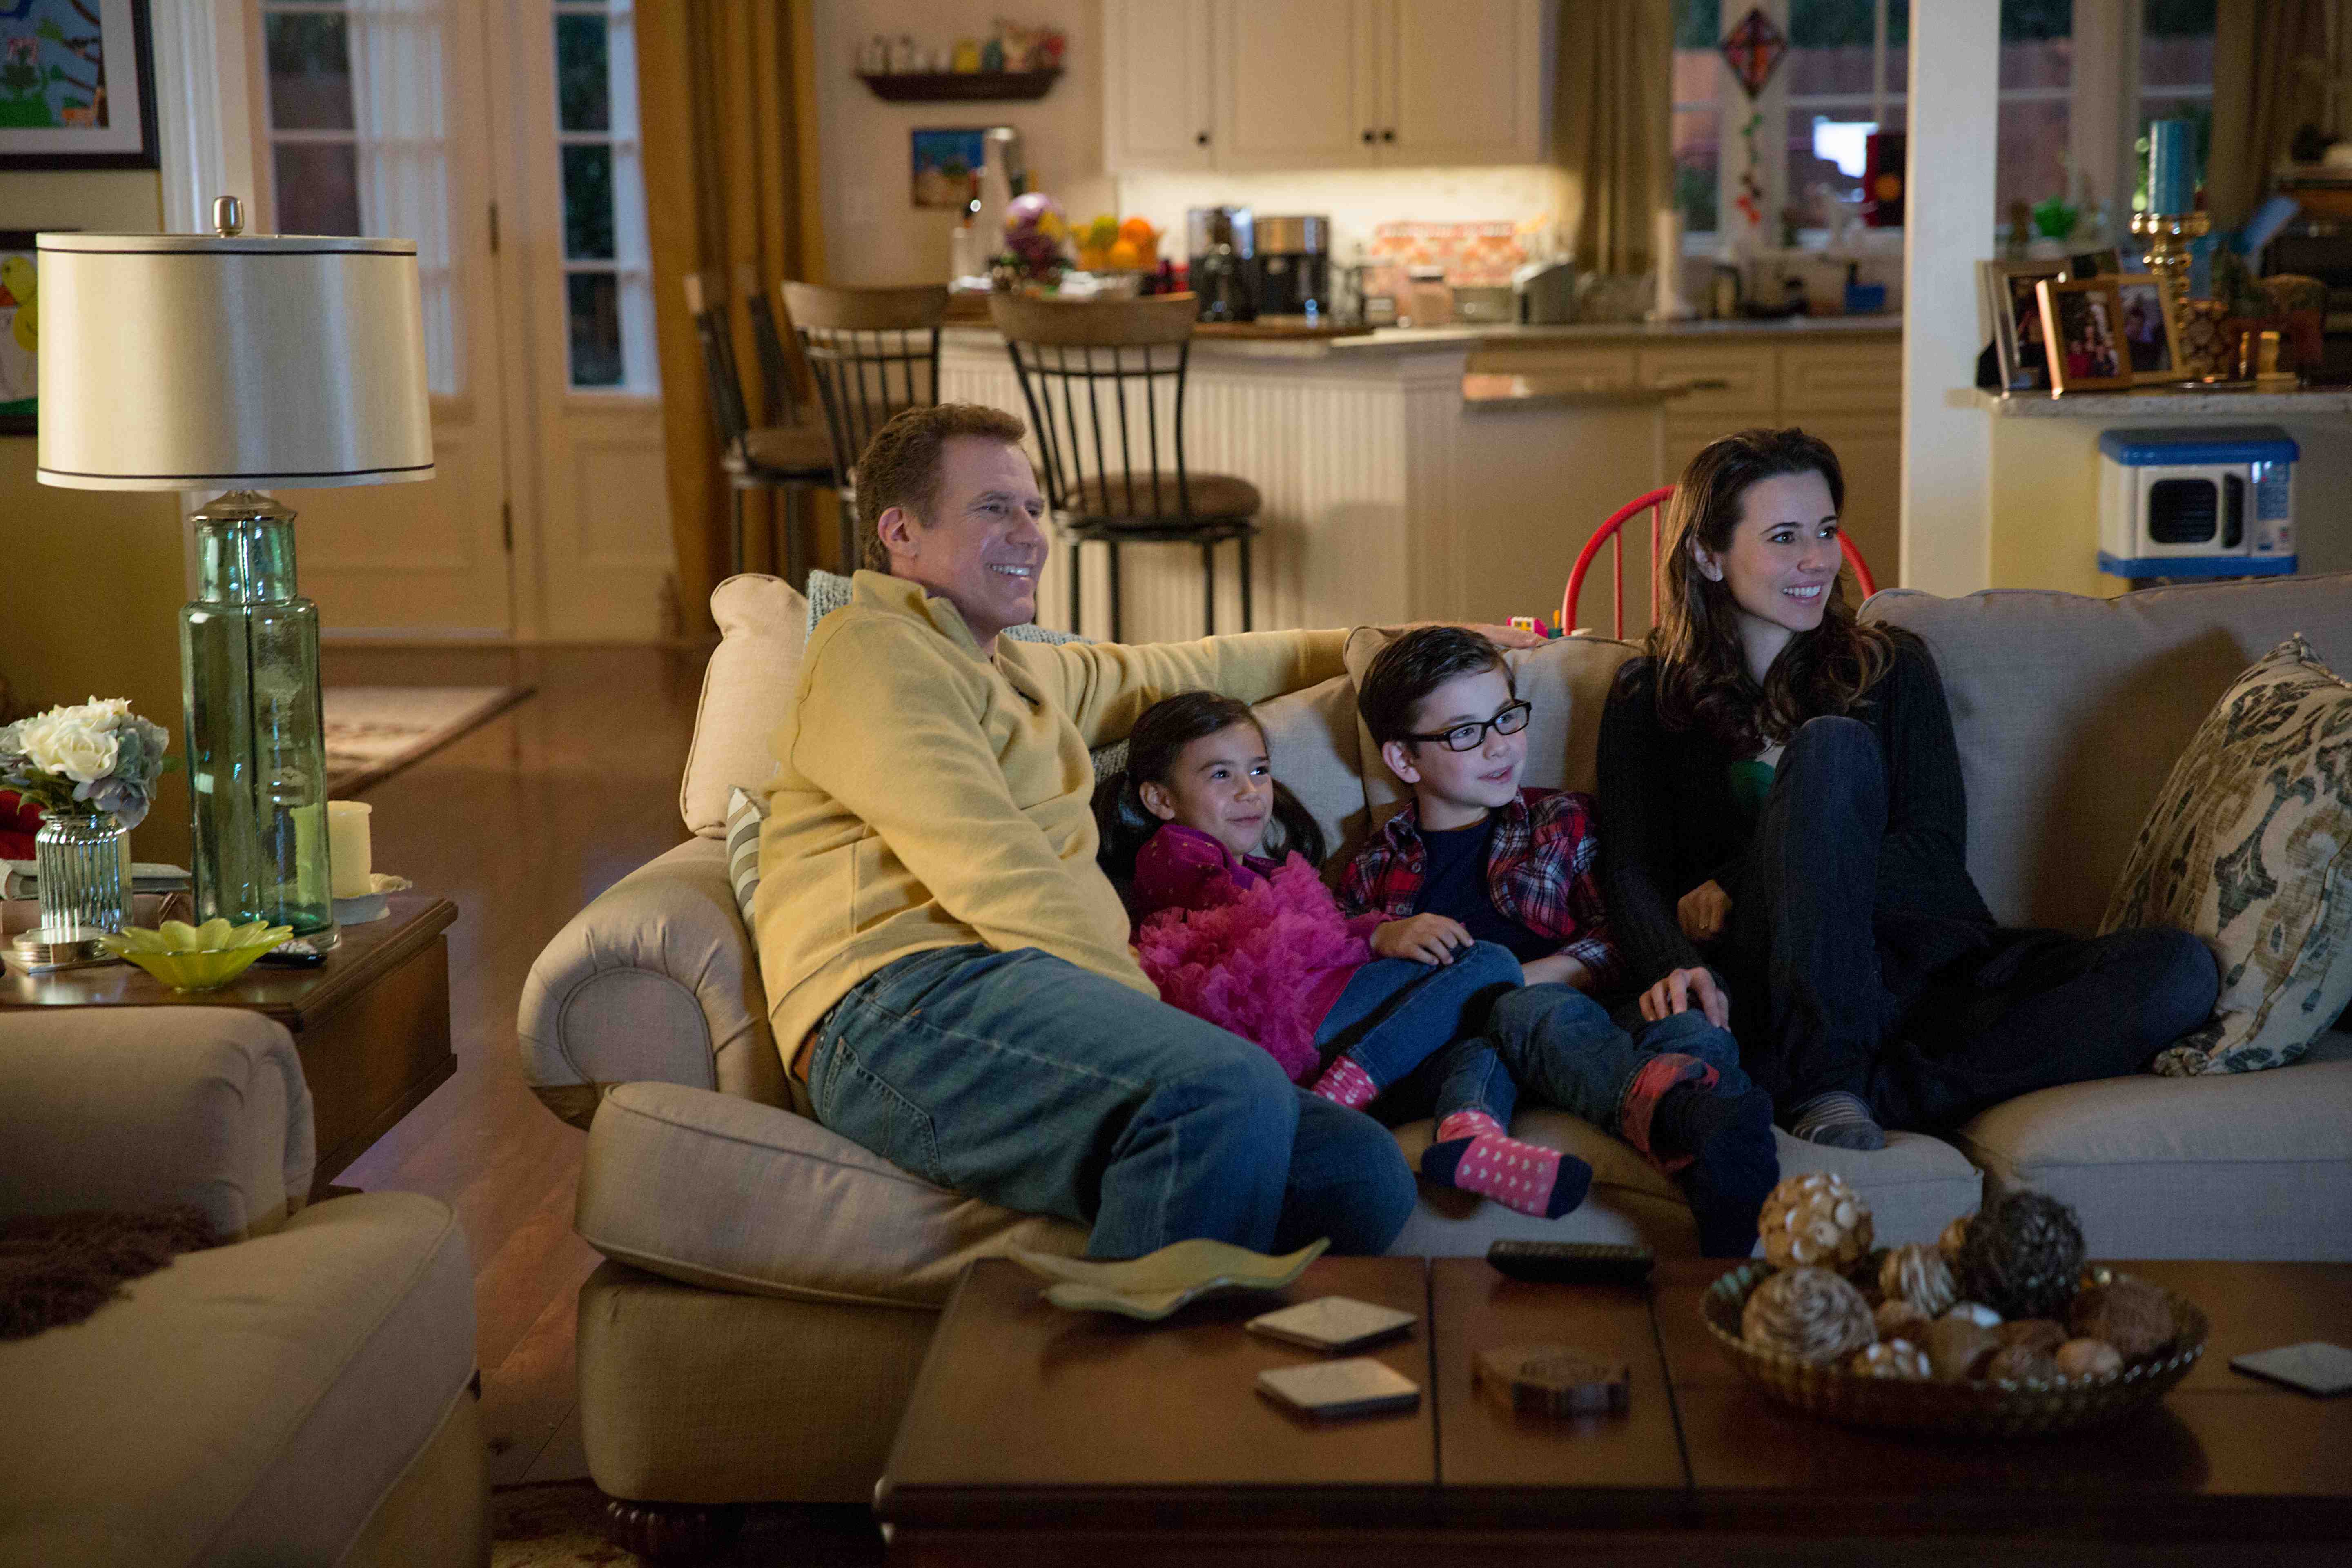 Left to right: Will Ferrell plays Brad Whitaker, Scarlett Estevez plays Megan, Owen Vaccaro plays Dylan, and Linda Cardellini plays Sara in Daddy?s Home from Paramount Pictures and Red Granite Pictures